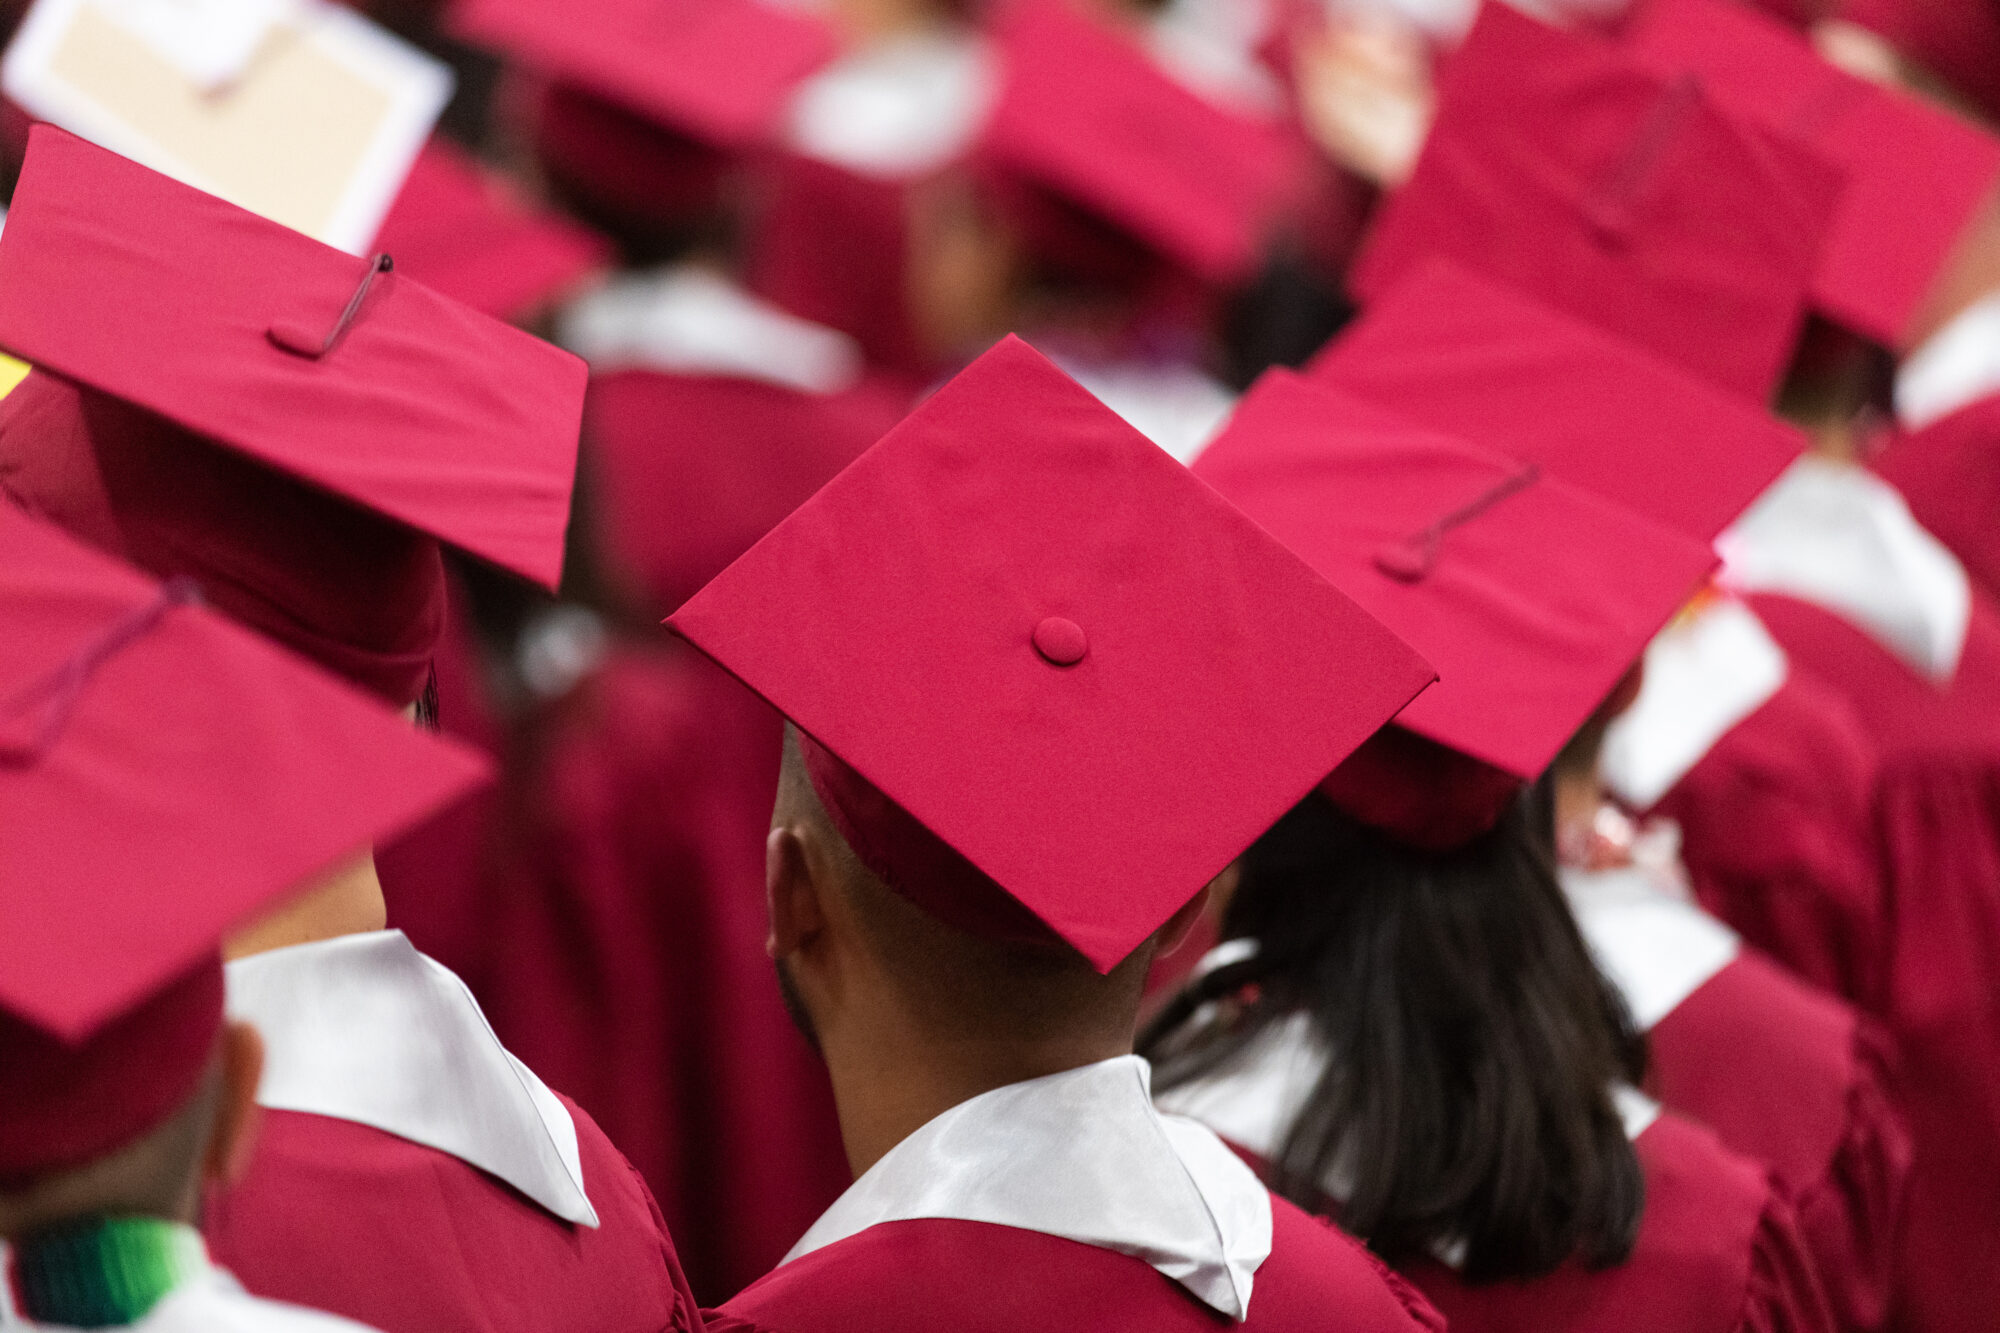 Rows of high school graduates in caps and gowns, viewed from behind. (Photo by Mat Hayward, Adobe Stock)